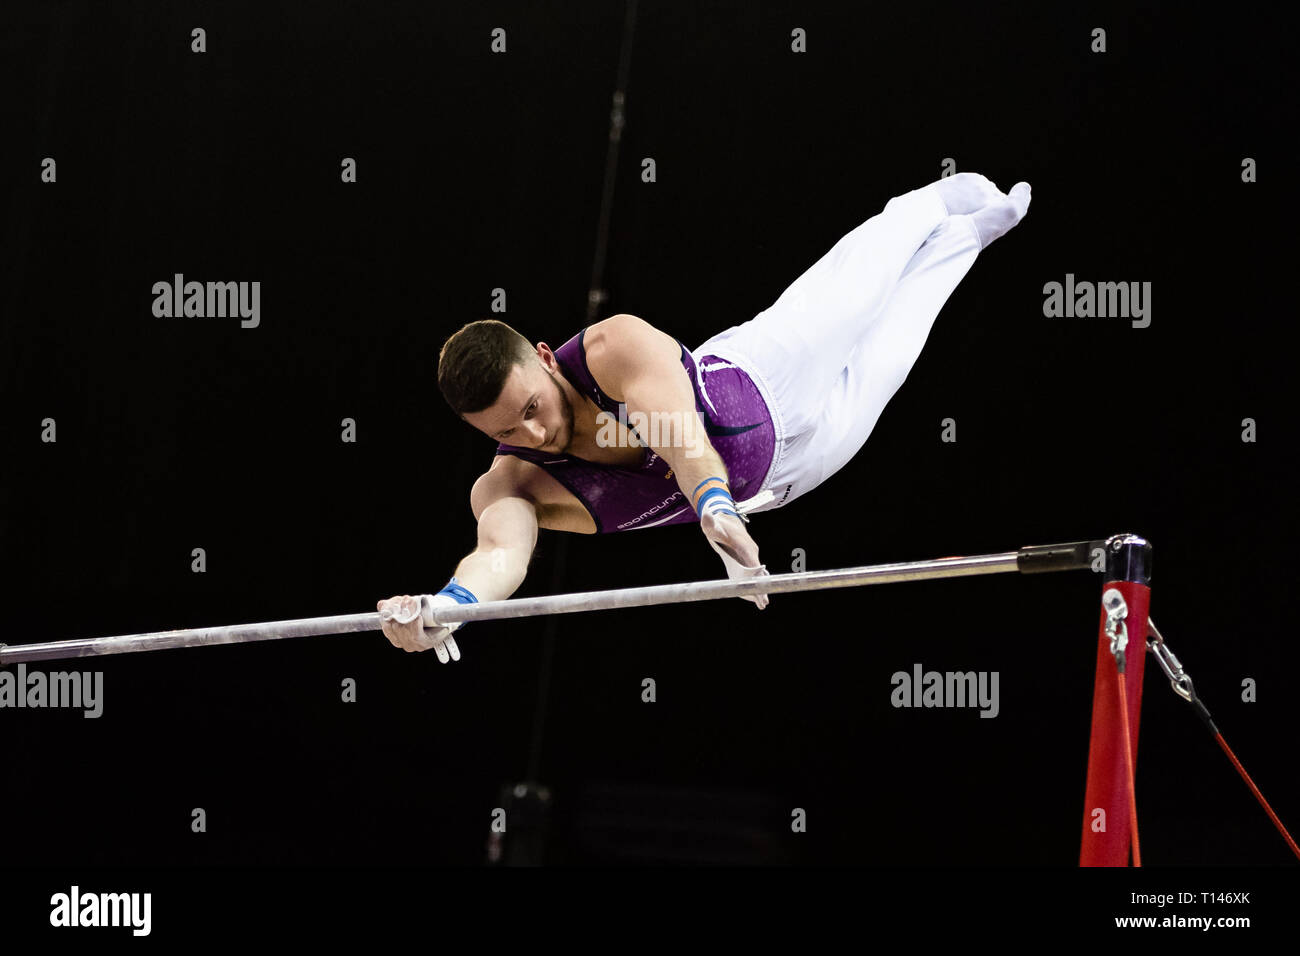 London, UK. 23rd March, 2019. Don Cunningham performs High Bar during the Matchroom Multisport presents the 2019 Superstars of Gymnastics at The O2 Arena on Saturday, 23 March 2019. LONDON ENGLAND. Credit: Taka G Wu/Alamy News Stock Photo